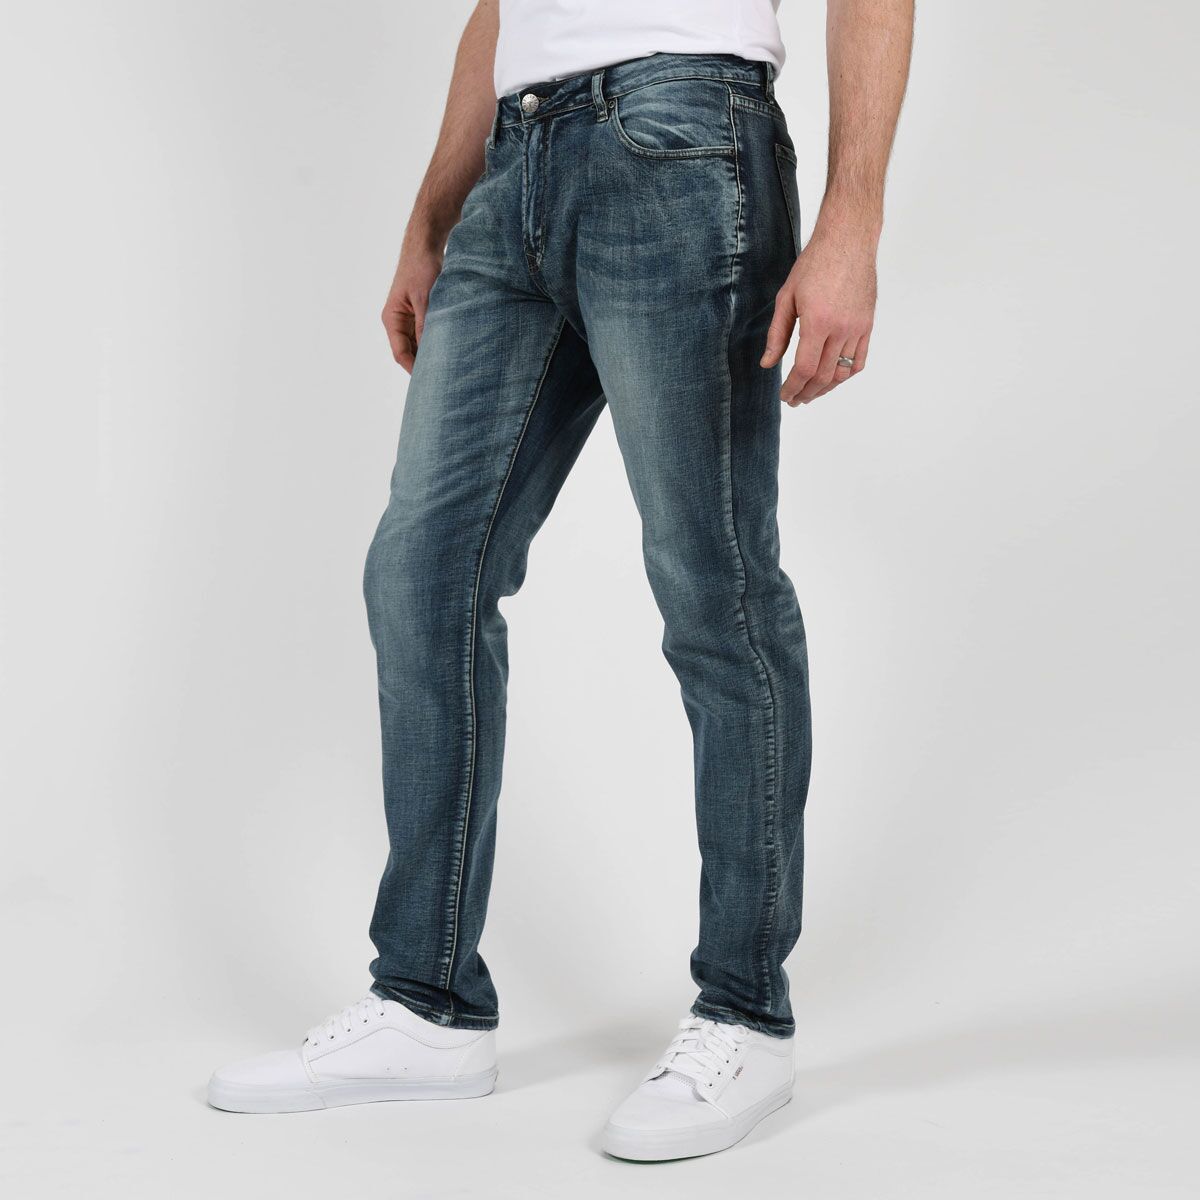 Tall Men's Fashion? It's in Our Jeans